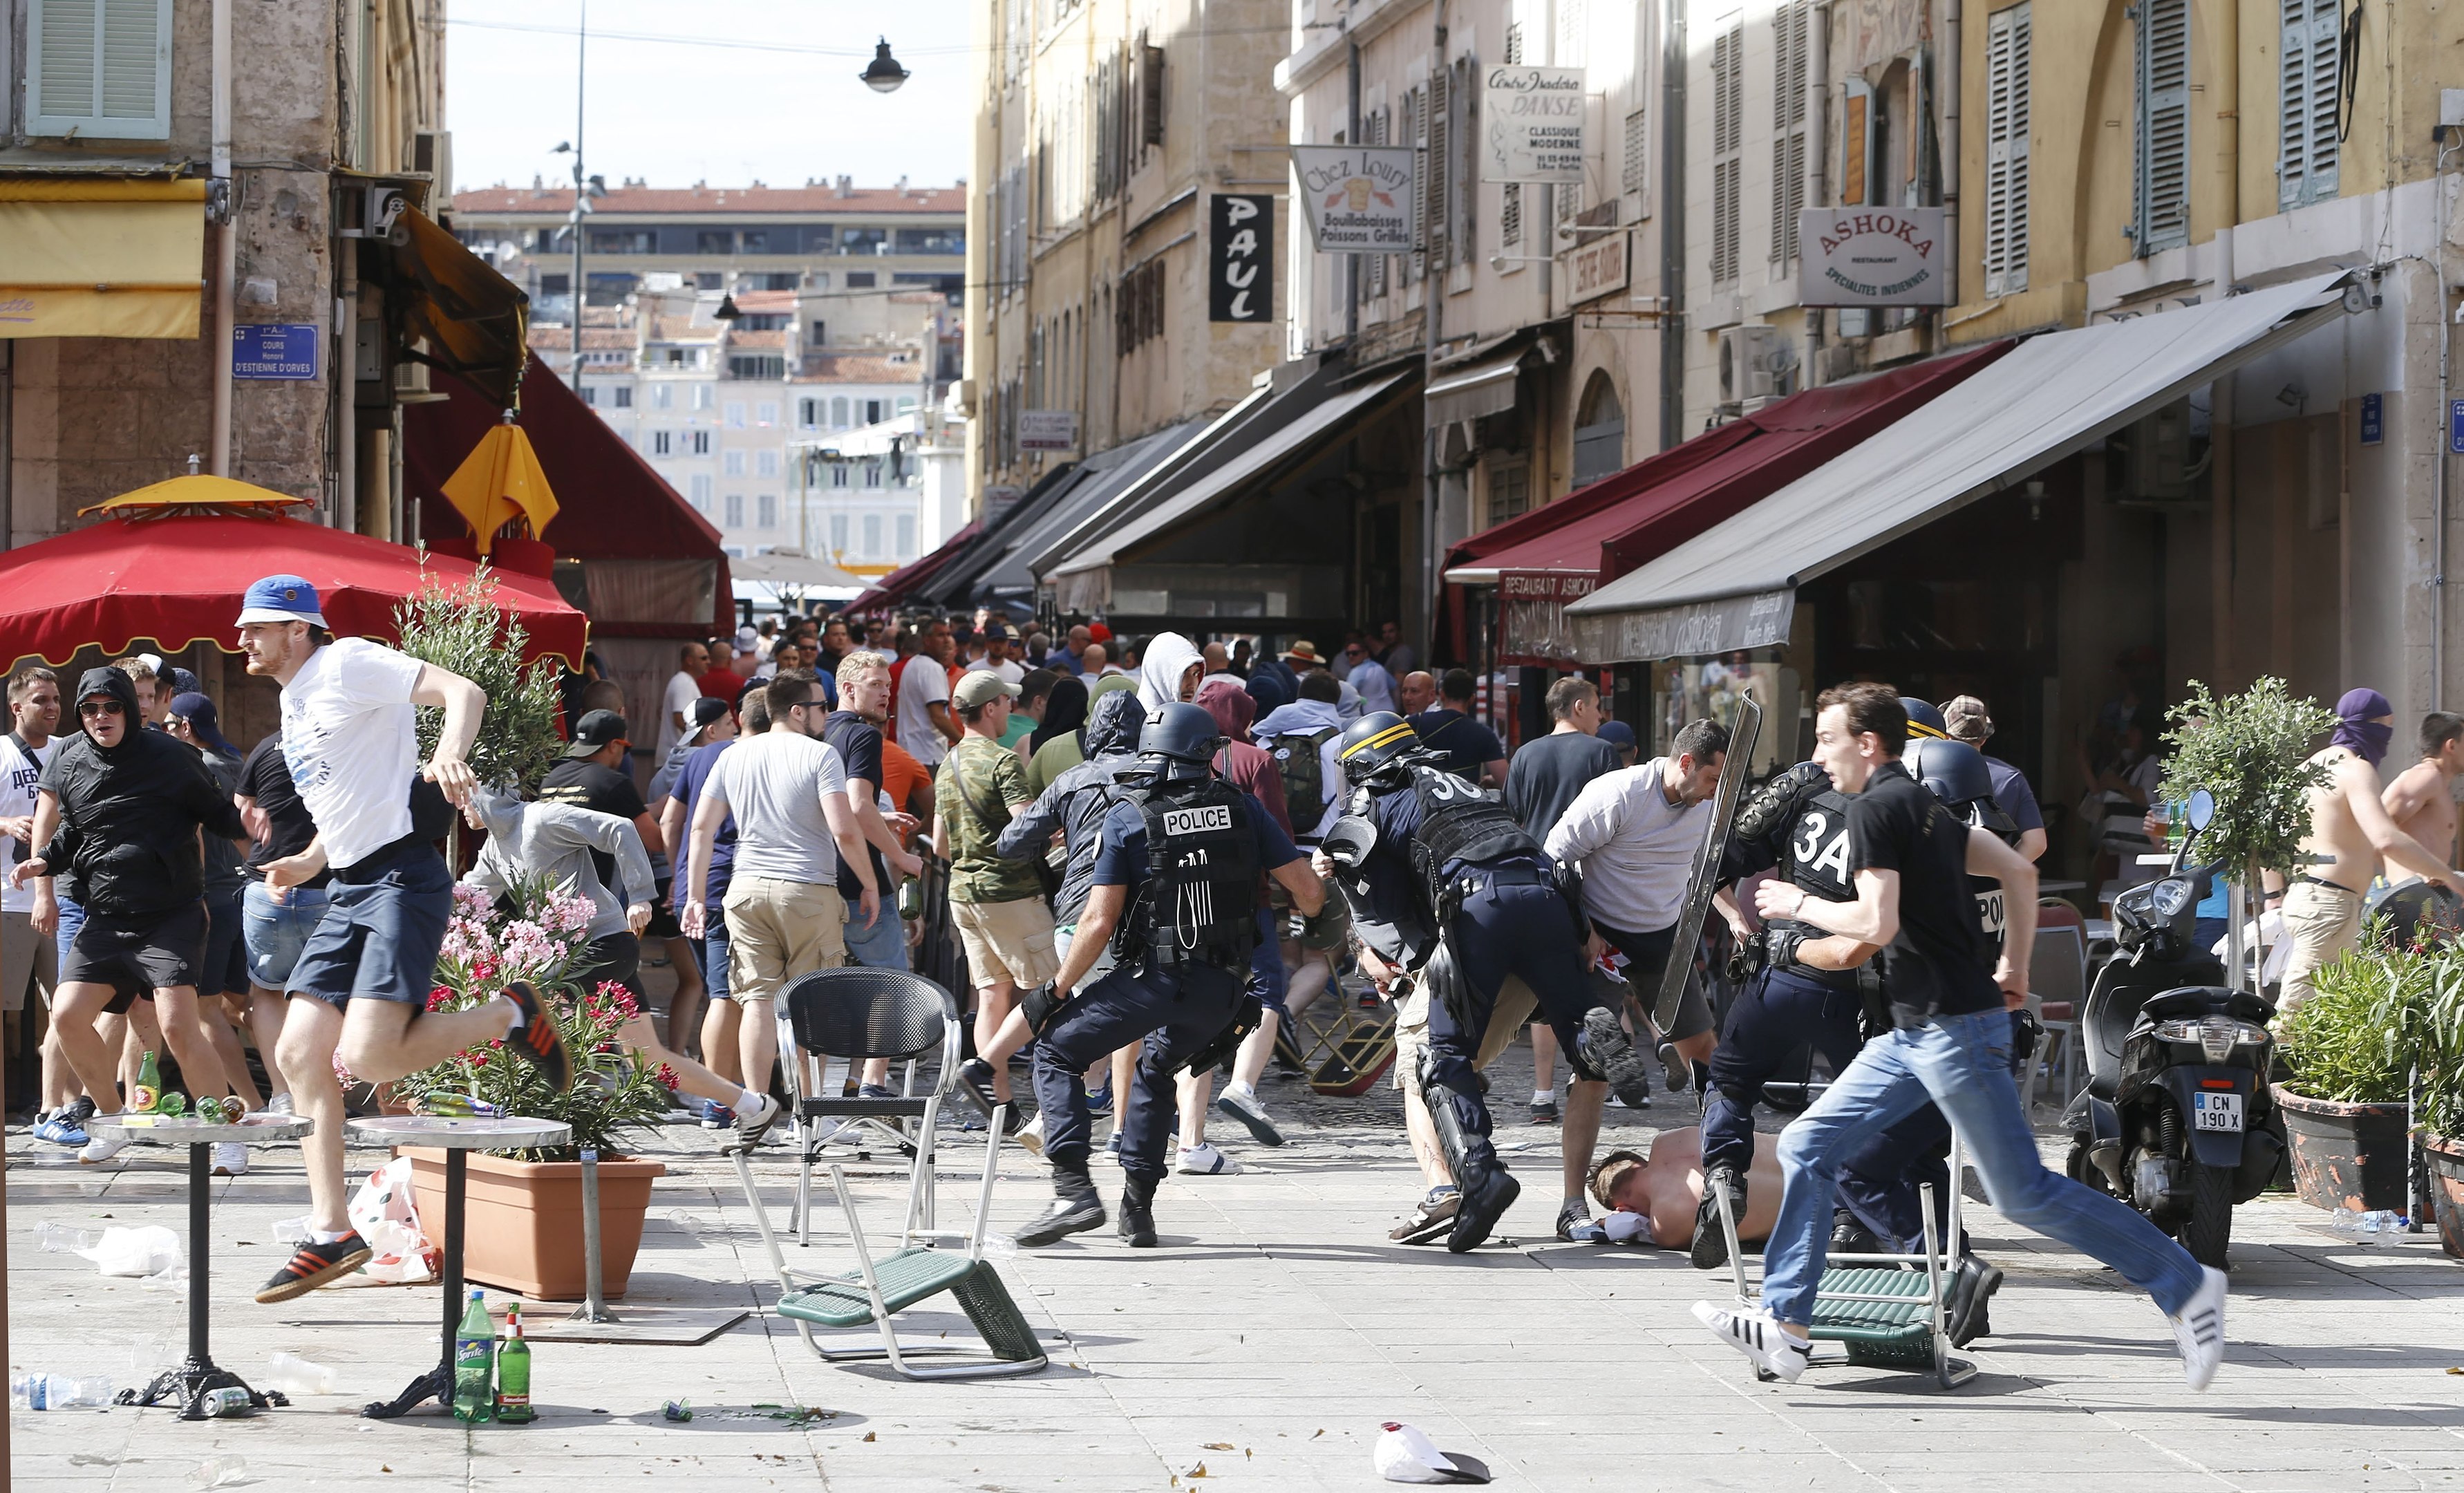 French police officers charge supporters during clashes in downtown Marseille, France (AP Photo/Darko Bandic)